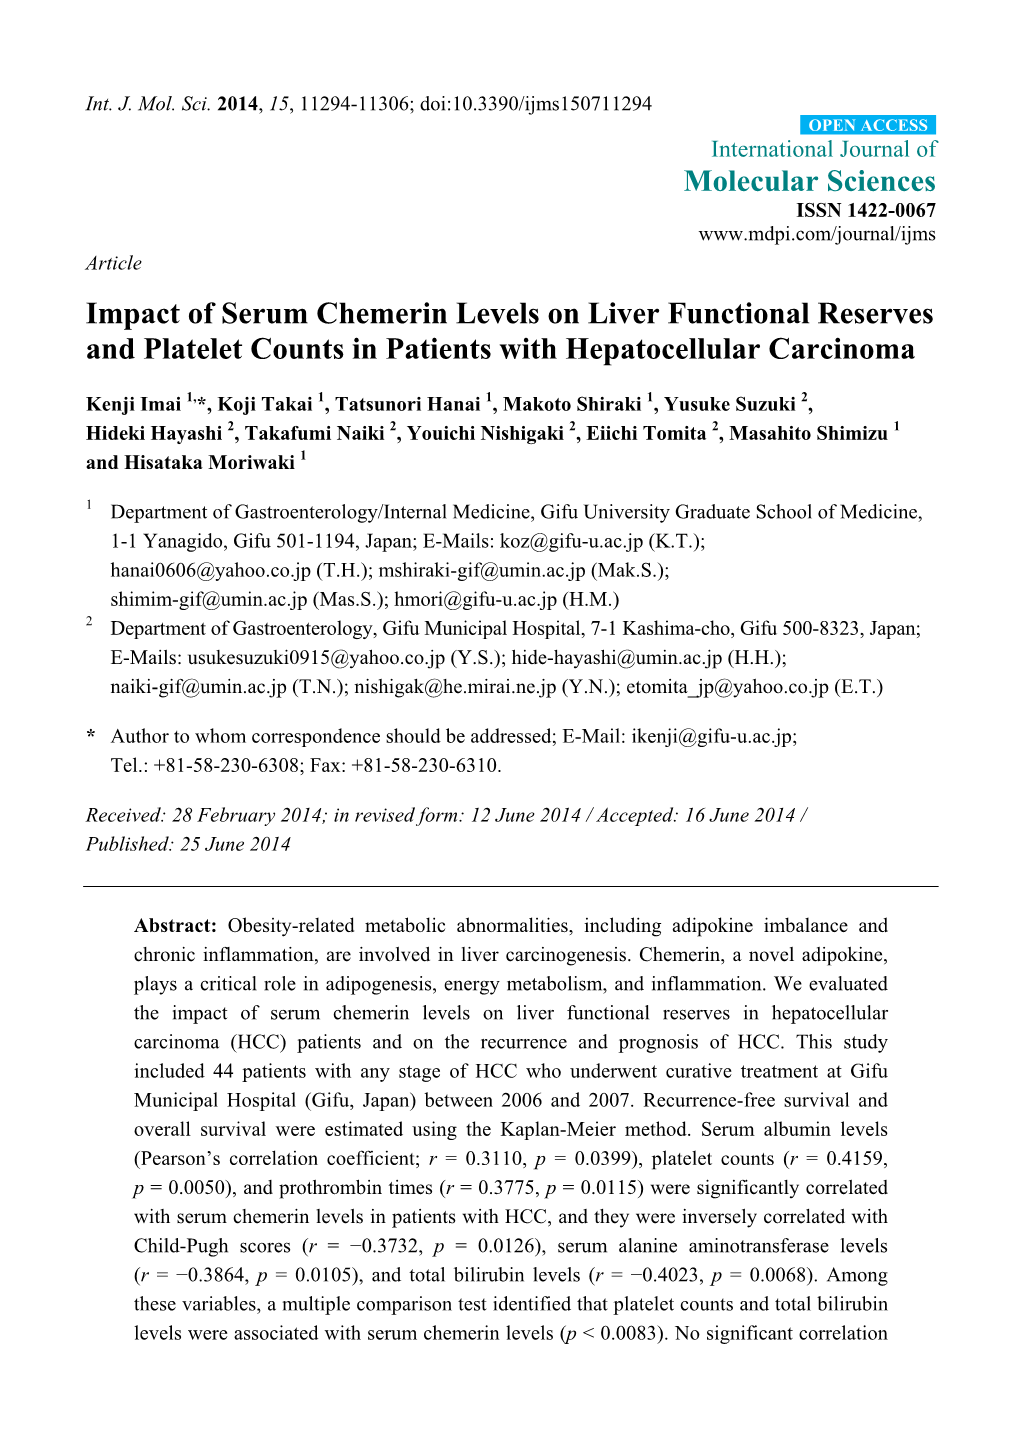 Impact of Serum Chemerin Levels on Liver Functional Reserves and Platelet Counts in Patients with Hepatocellular Carcinoma